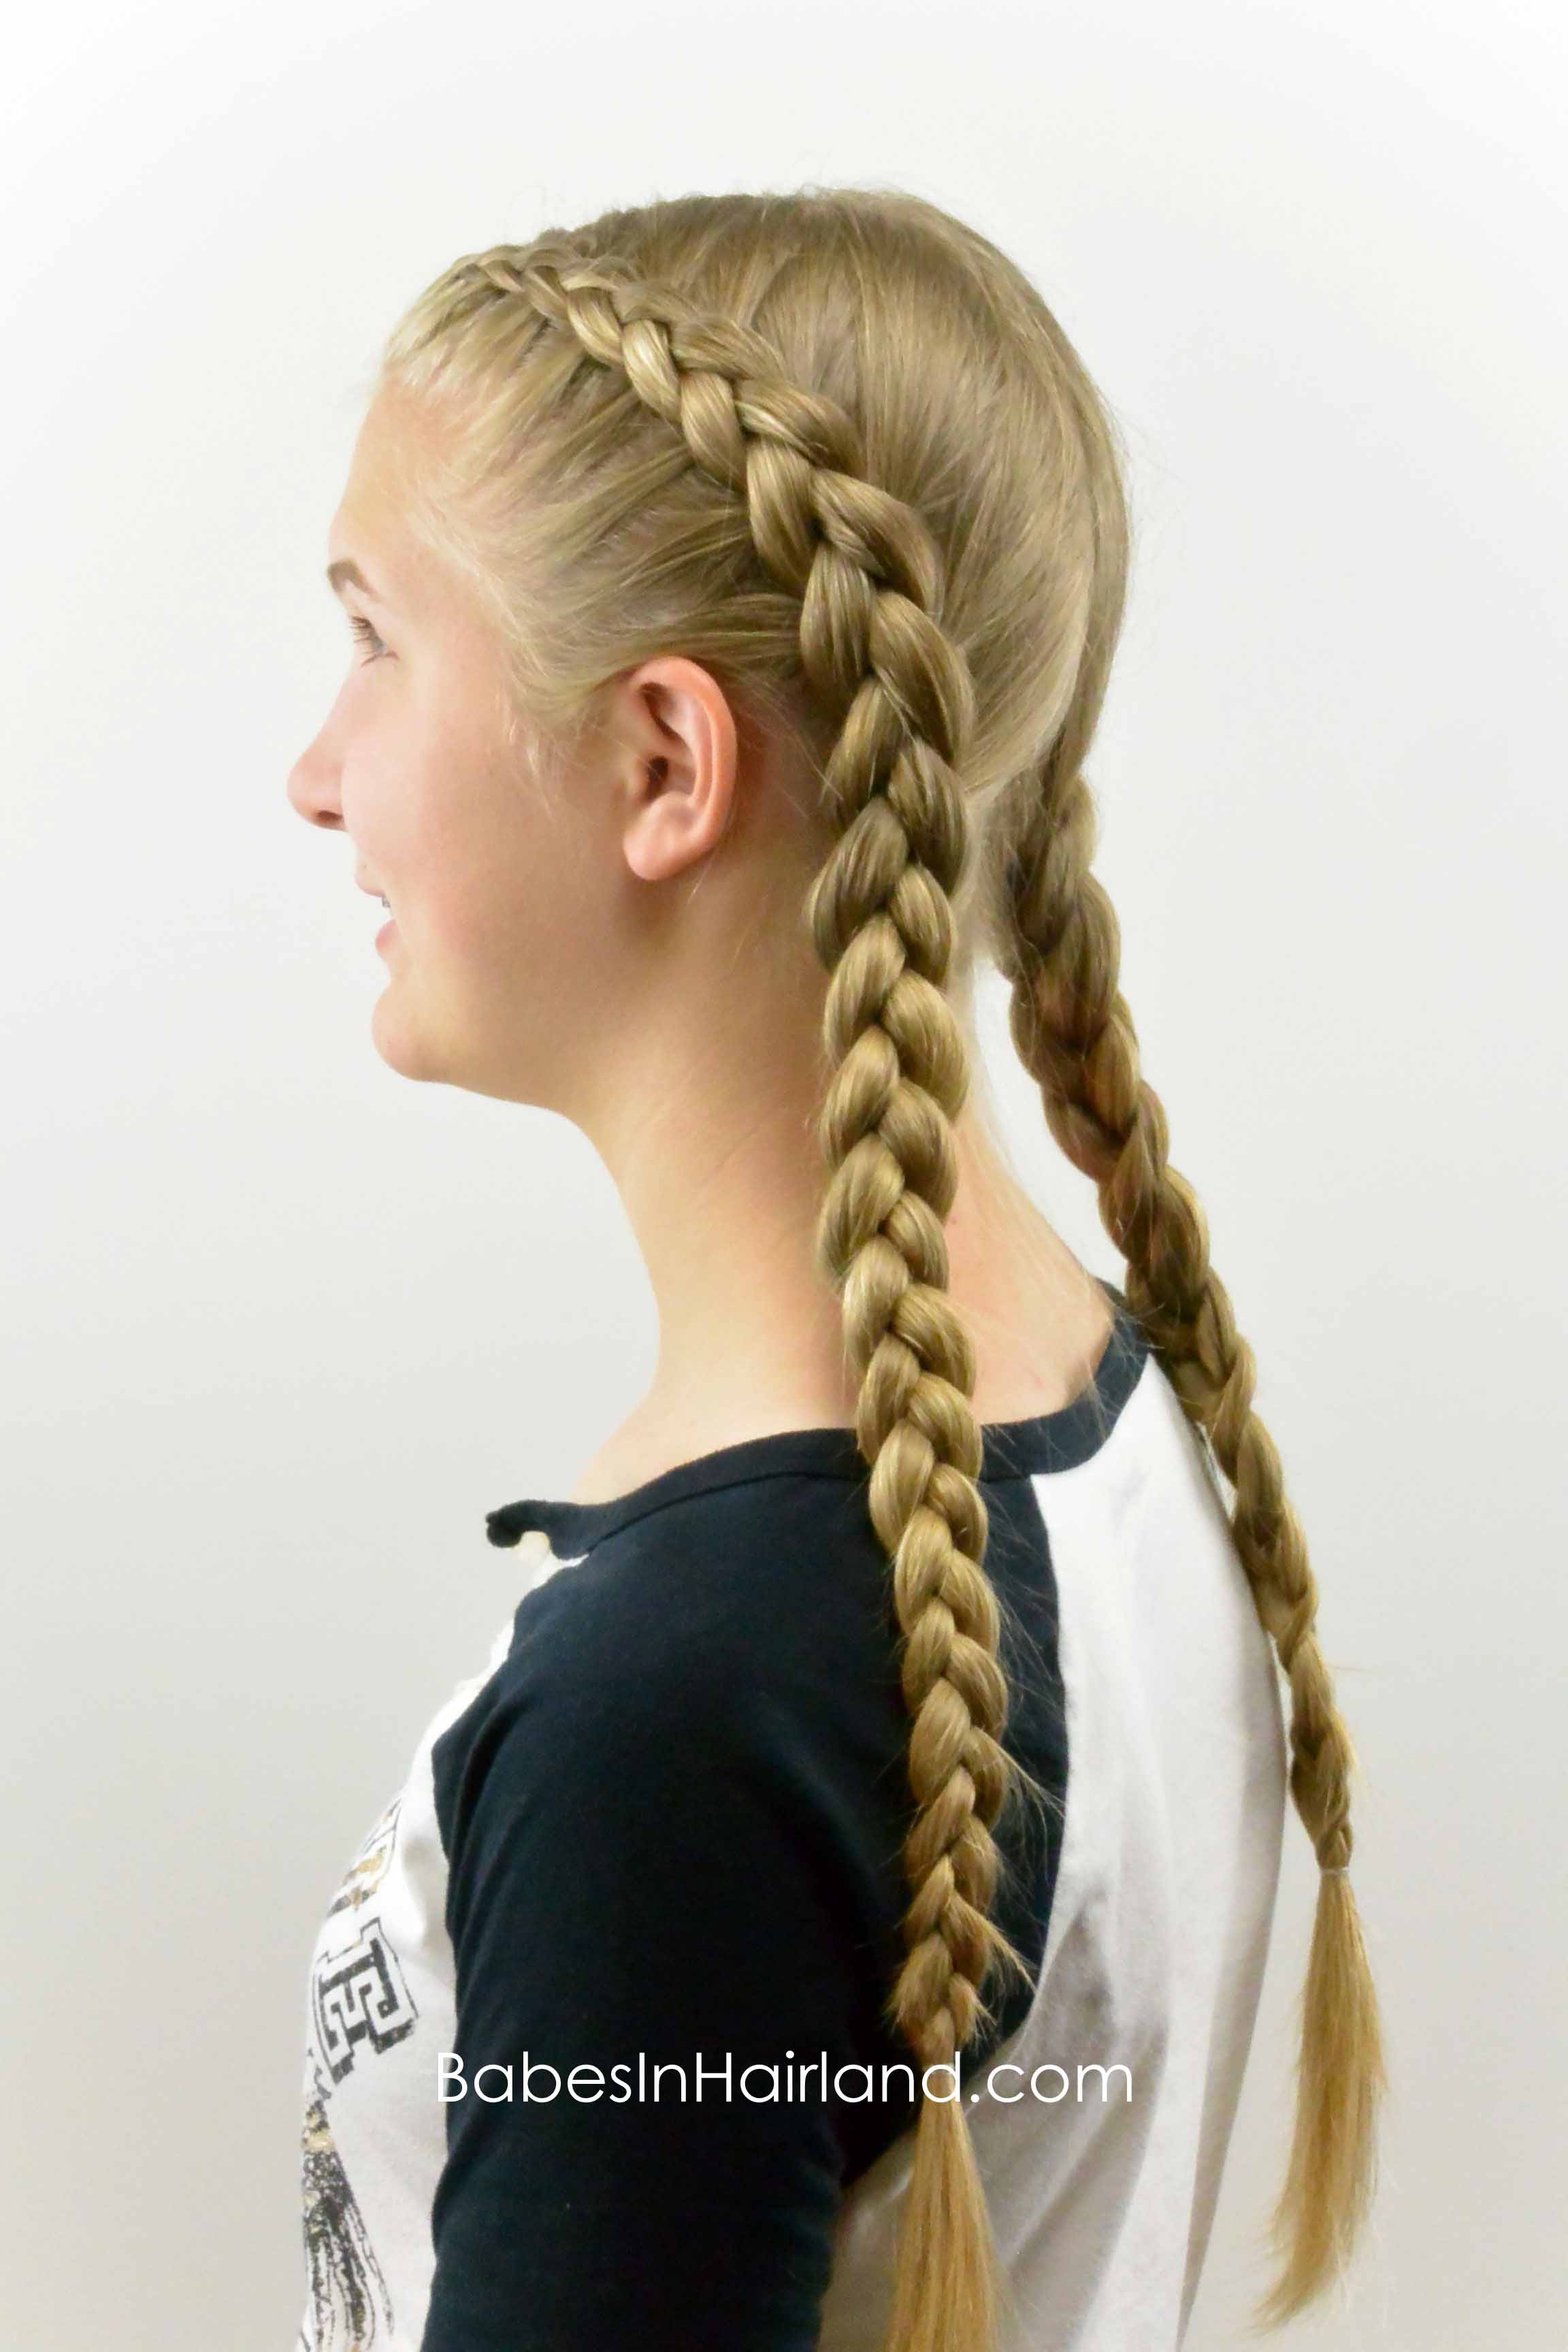 This Is the Difference Between a French Braid and a Dutch Braid